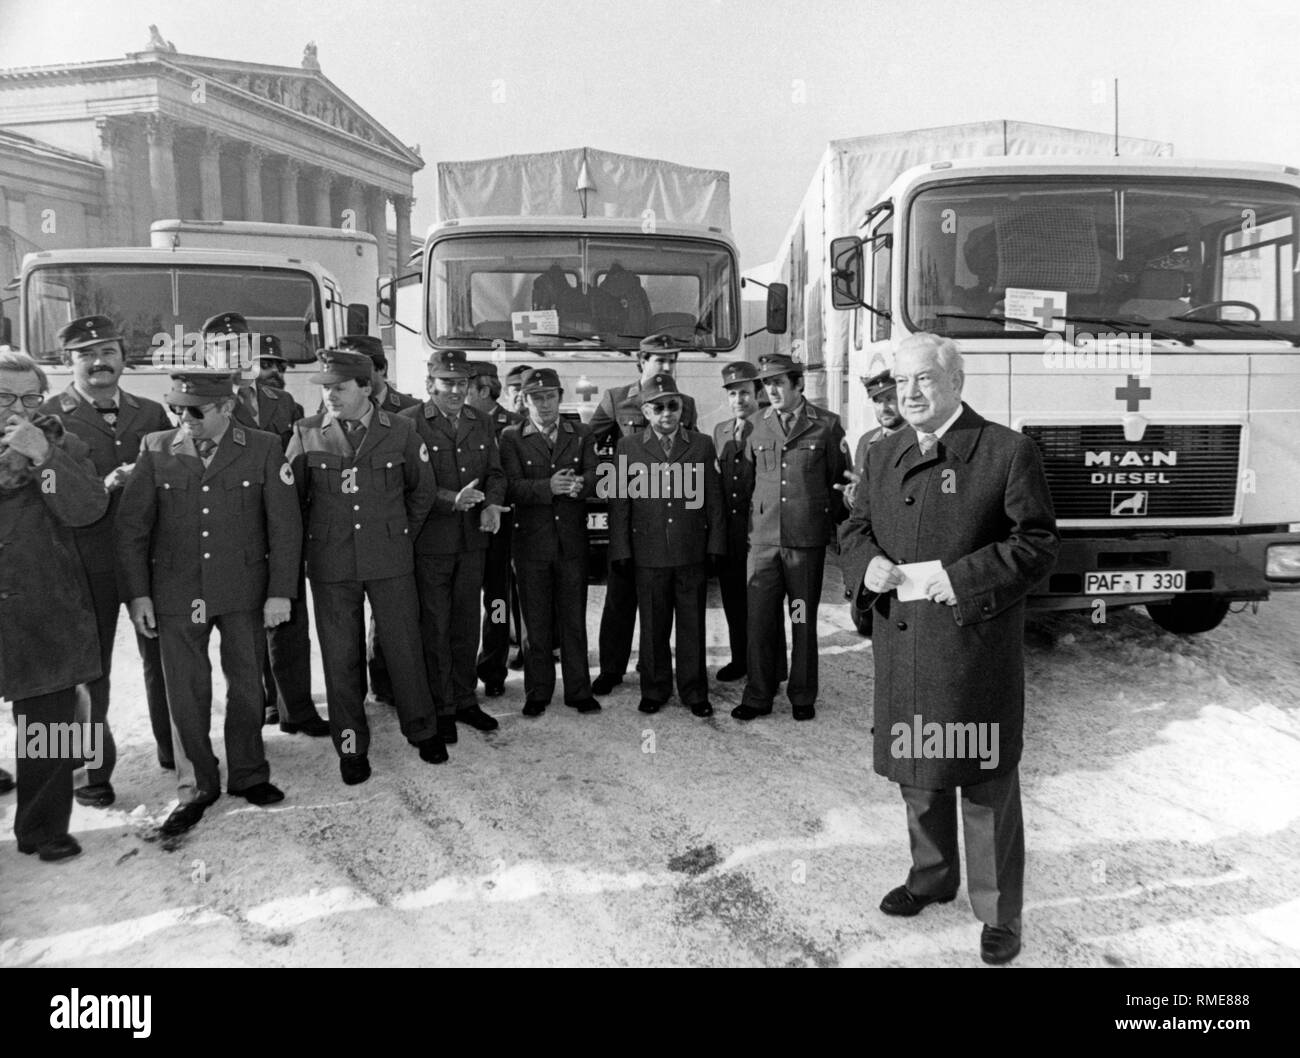 The Bavarian politician and president of the Bavarian Red Cross, Alfons Goppel (r.) in Munich, at the departure of a 100-ton aid convoy to Poland. The convoy, which was put together at the request of the Polish Red Cross, carries basic food, winter clothing, high-quality medicines and general hospital supplies and is accompanied by 17 Red Cross employees (some in the background) and an interpreter. The total value of these 100 tons of relief supplies is about 800,000 marks. It was financed by donations from the Bavarian population. To this were added donations from the industrial sector. Stock Photo